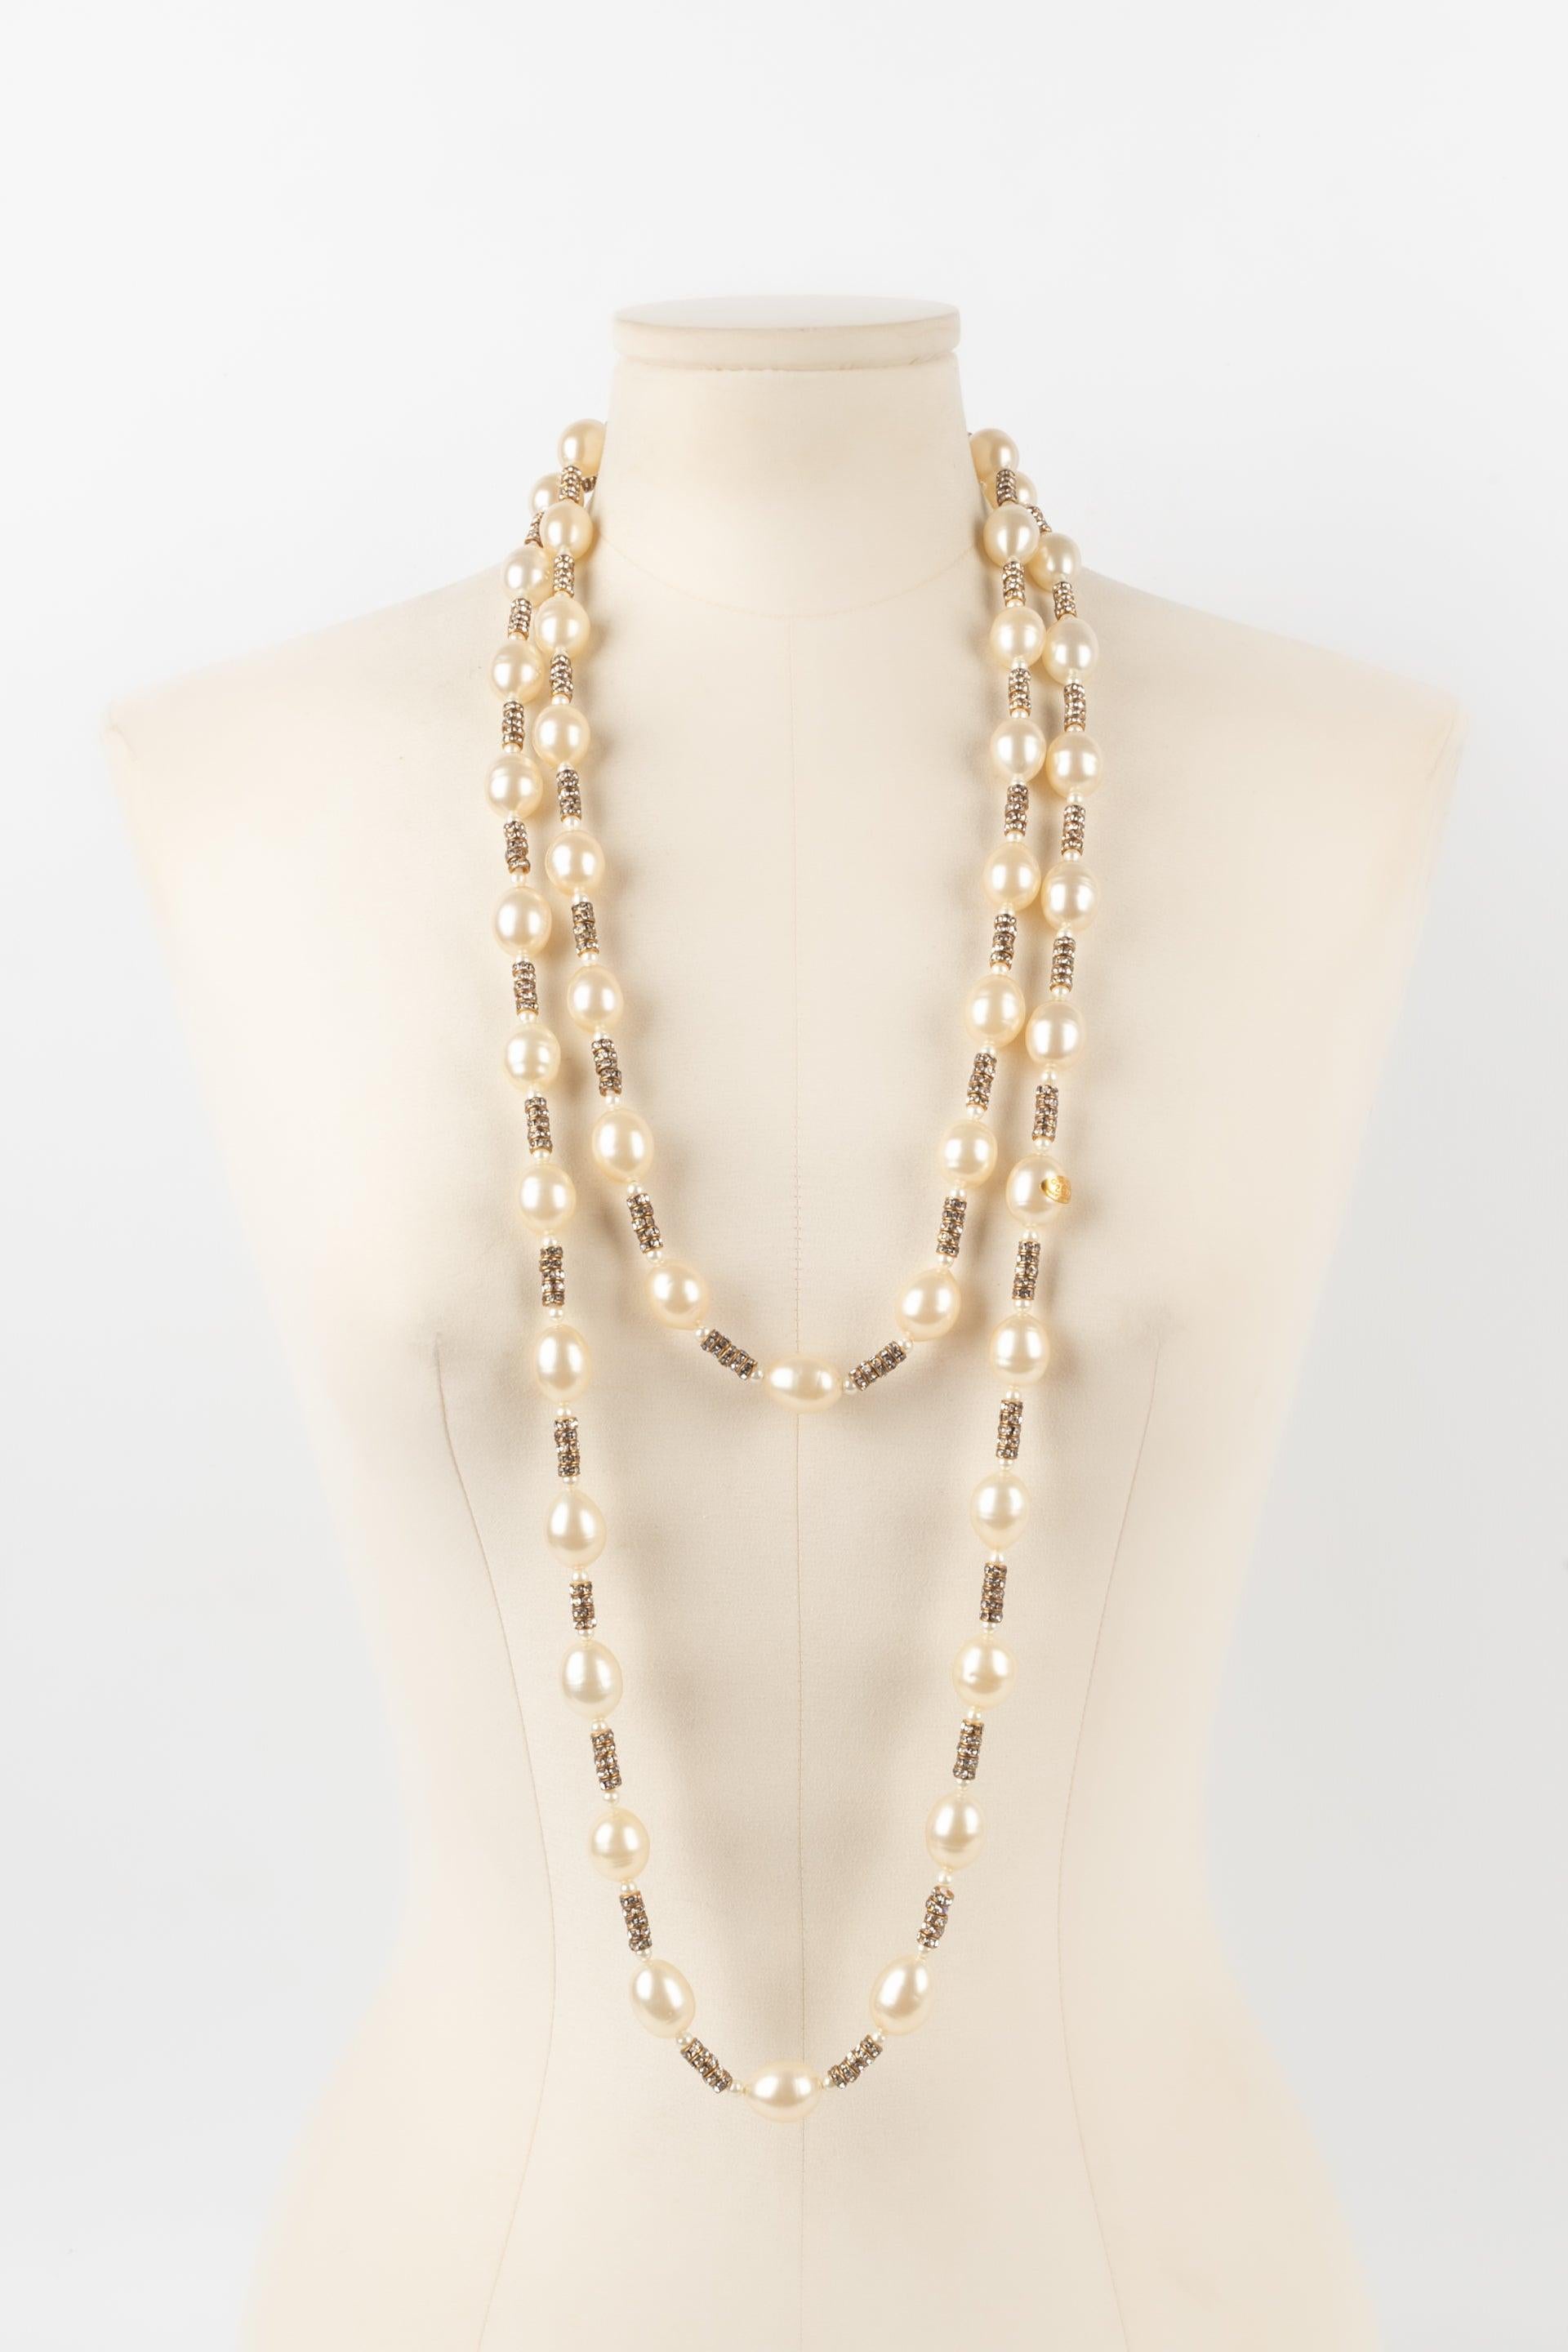 Chanel - (Made in France) Costume pearl sautoir with golden metal rhinestone rings. 2cc9 Collection.

Additional information:
Condition: Very good condition
Dimensions: Length: 180 cm

Seller Reference: CB229